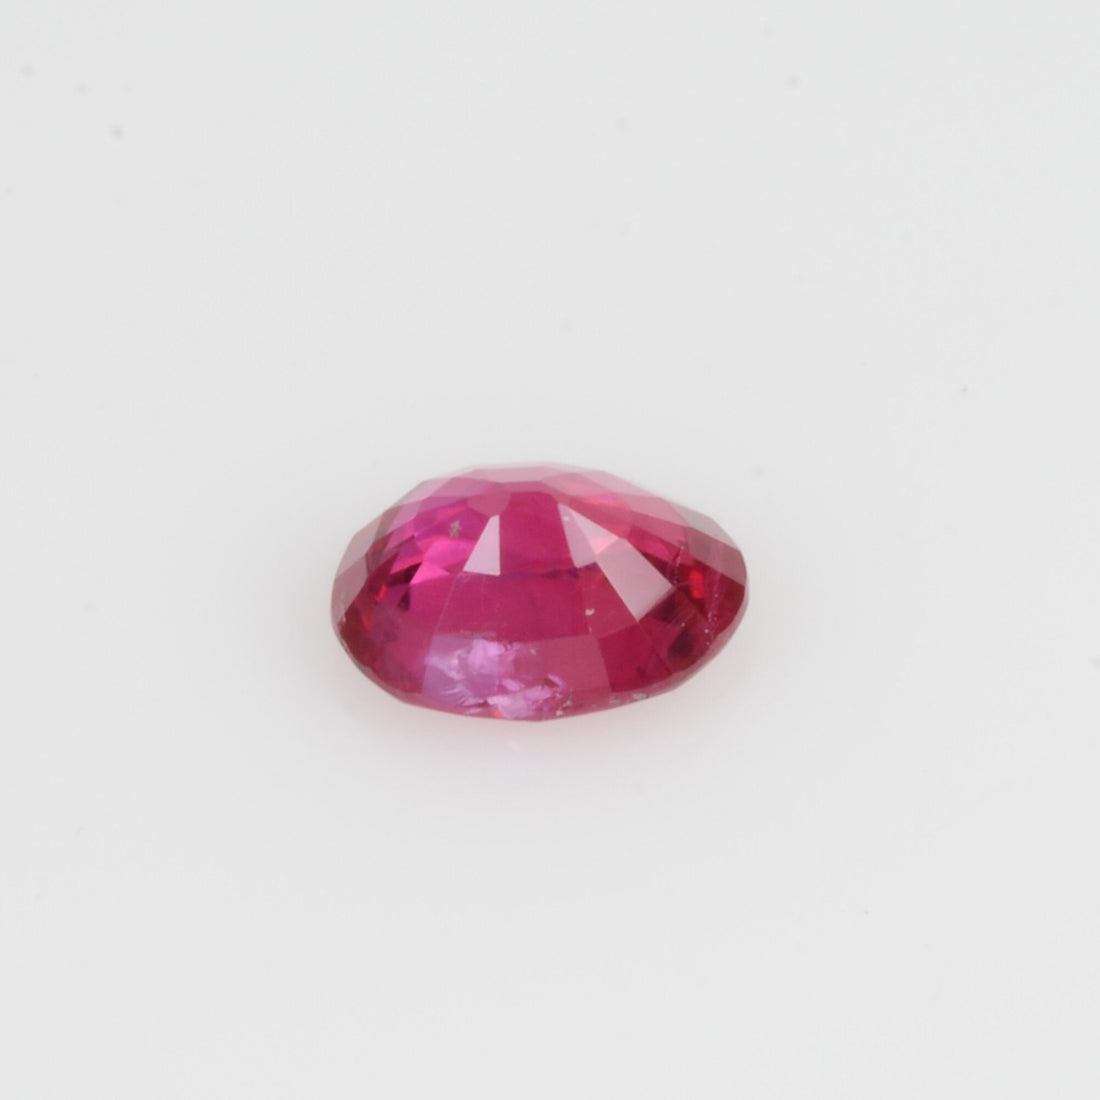 0.35 Cts Natural Ruby Loose Gemstone Oval Cut